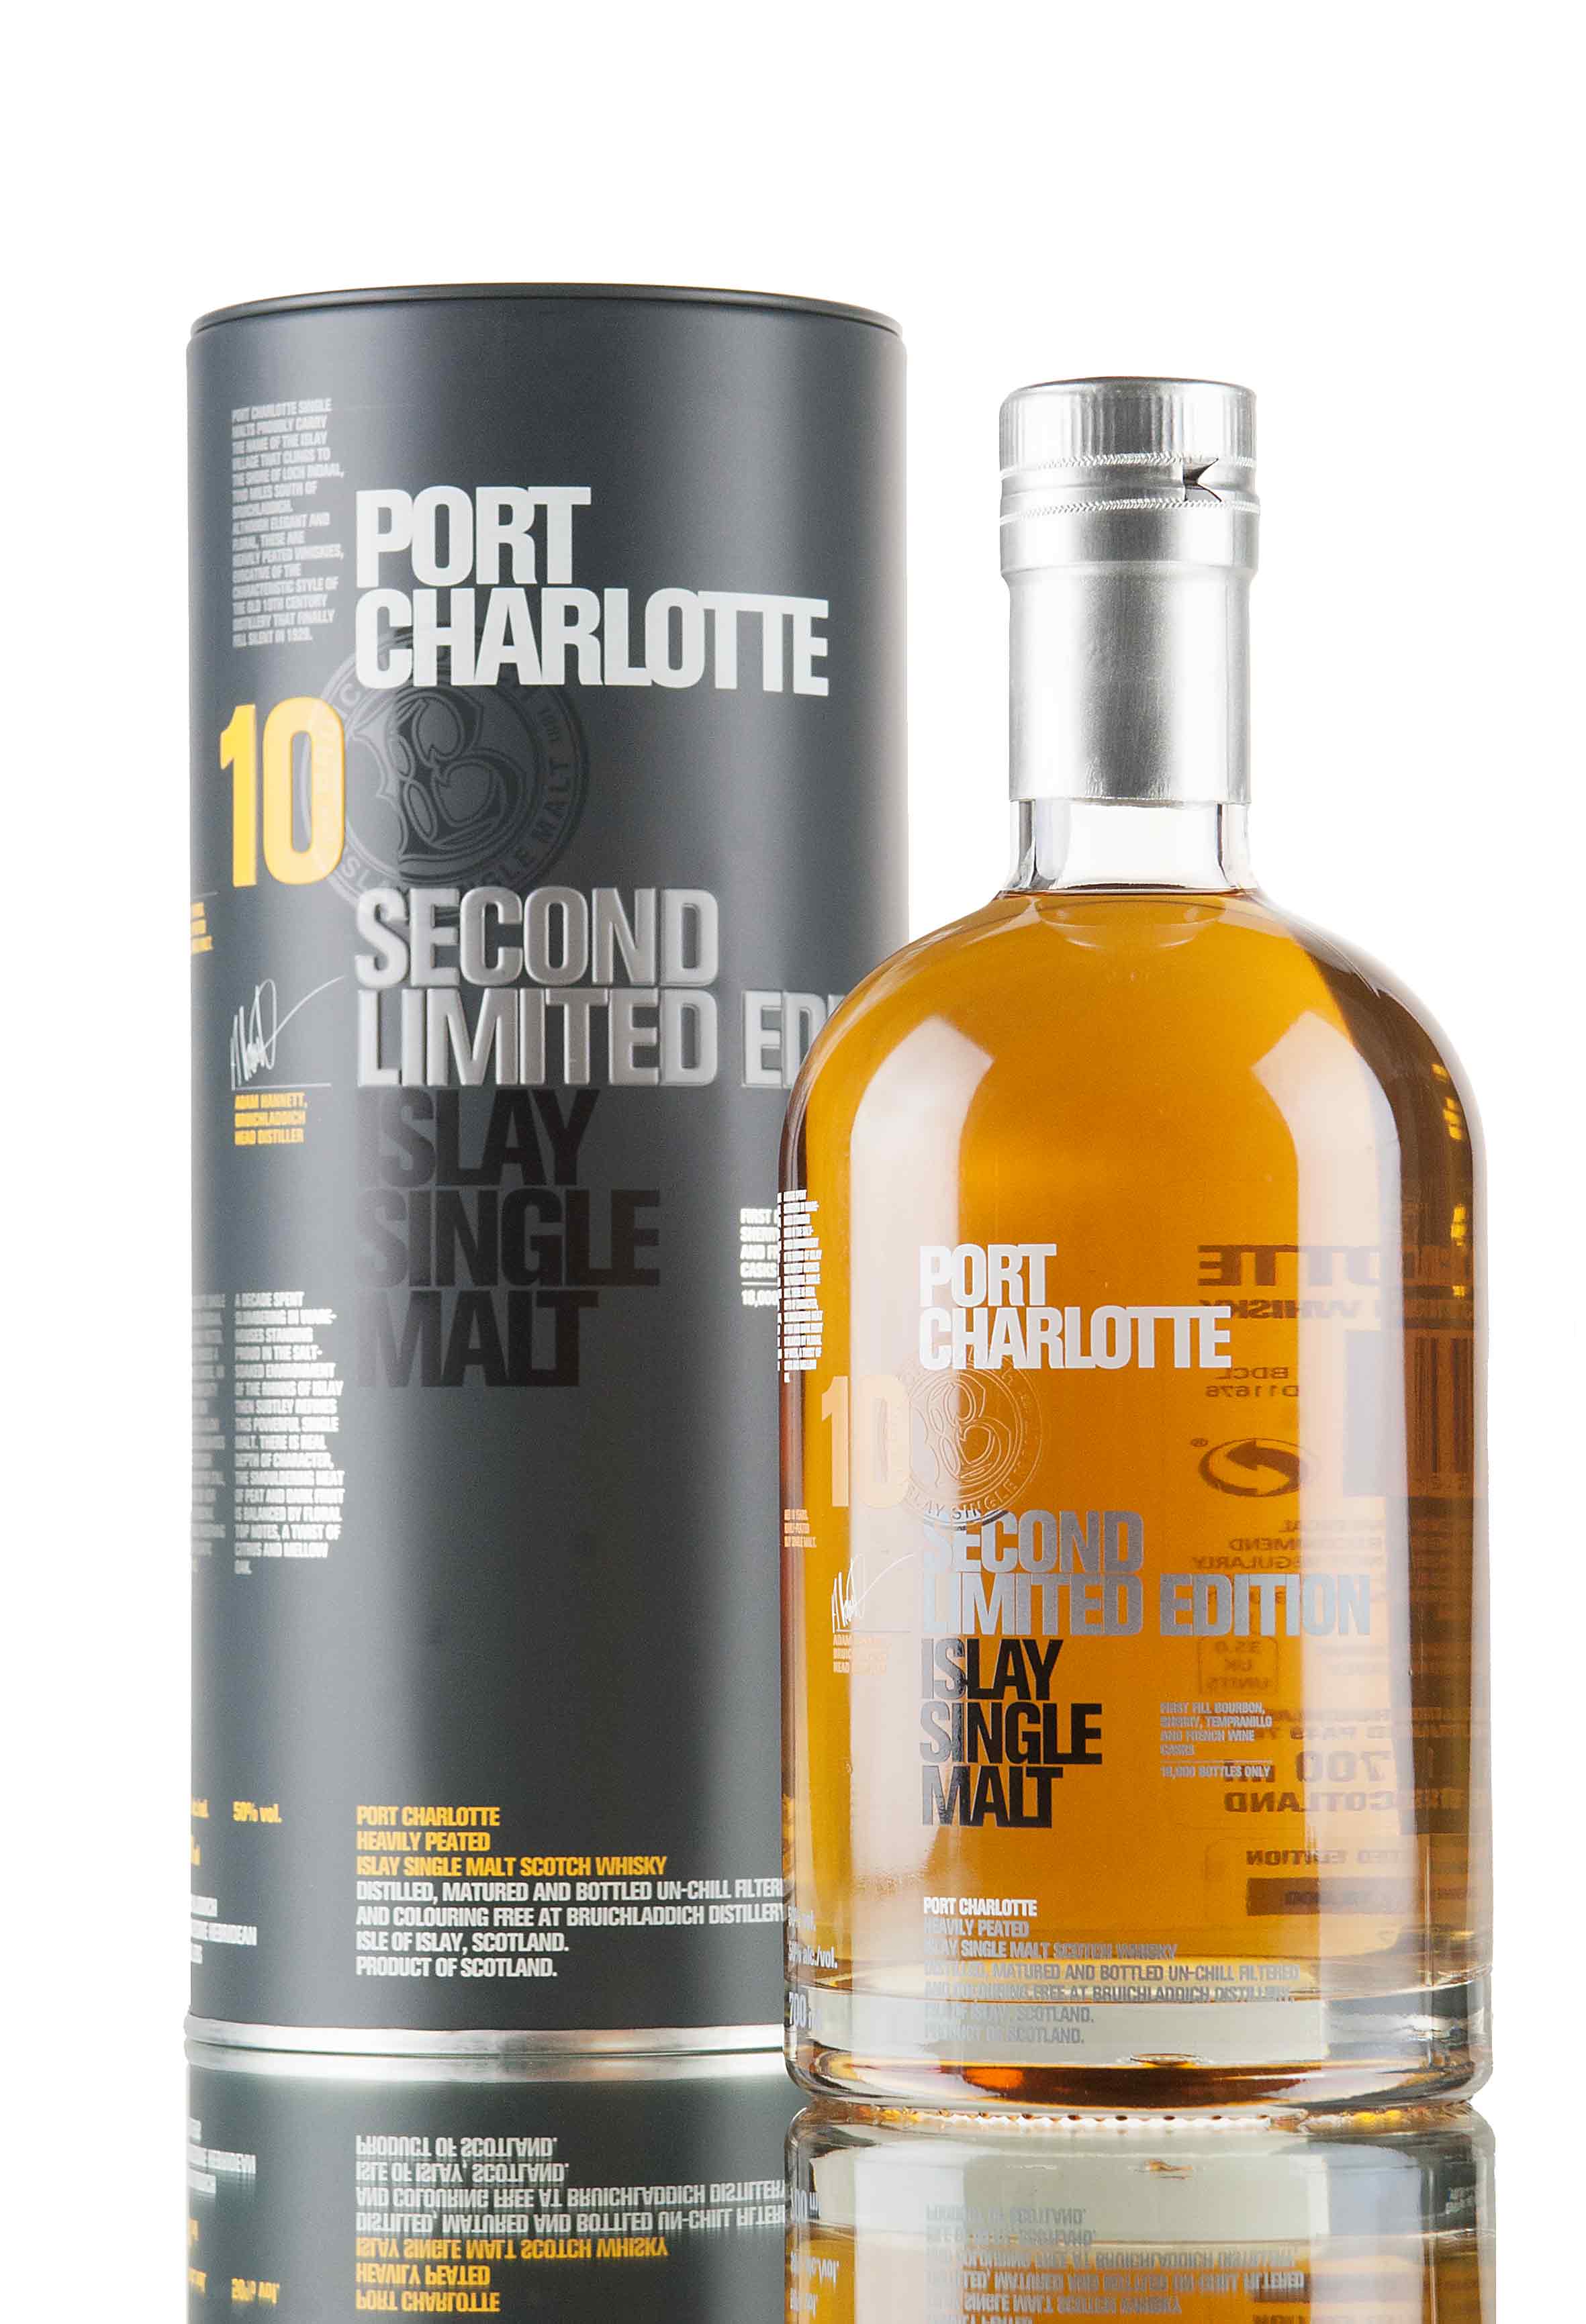 Port Charlotte 10 Year Old - 2nd Limited Edition